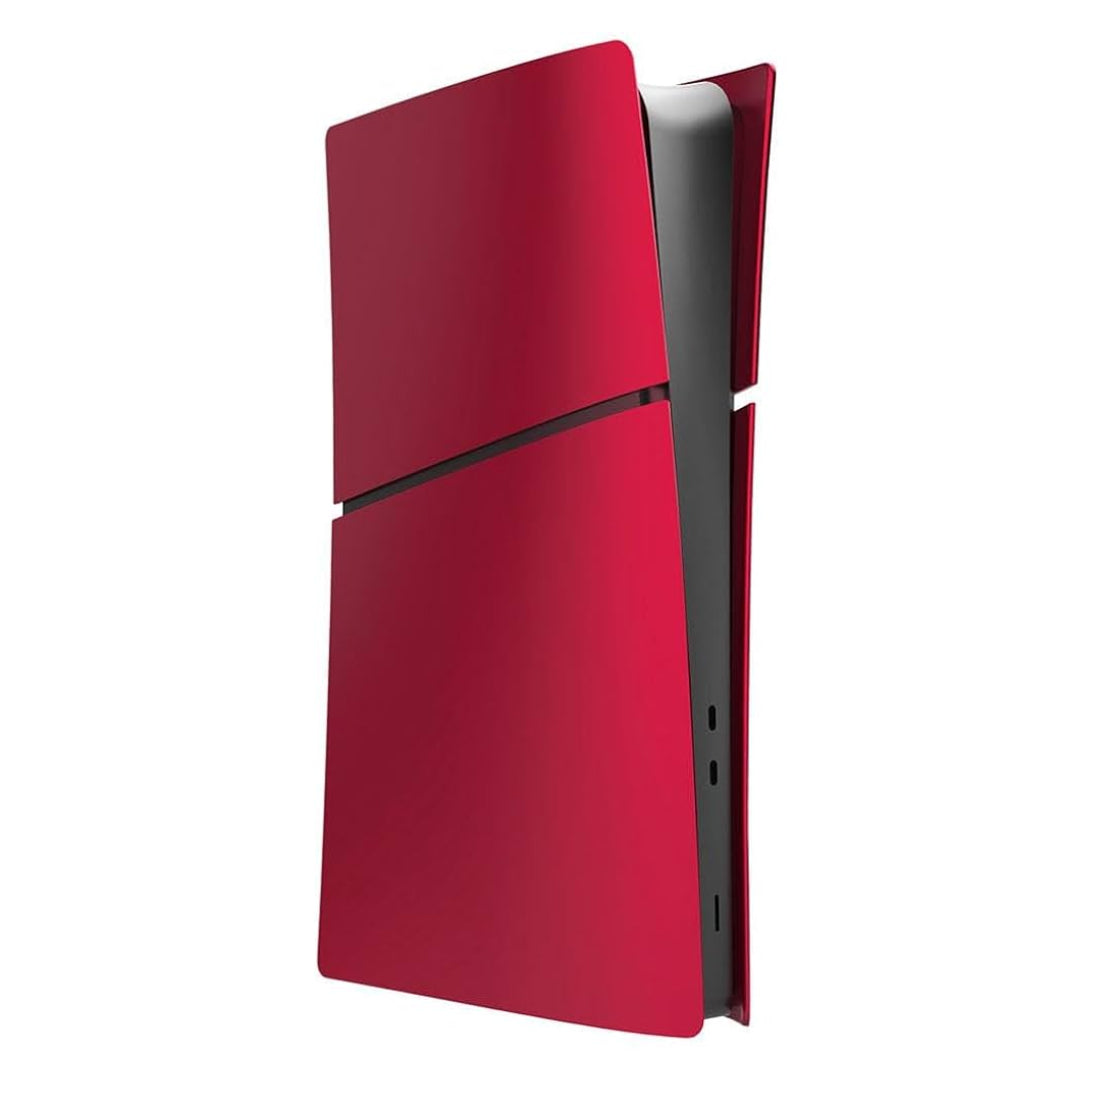 Faceplate Slim Plastic Cover For Playstation 5 - Digital Edition - Red - أكسسوار